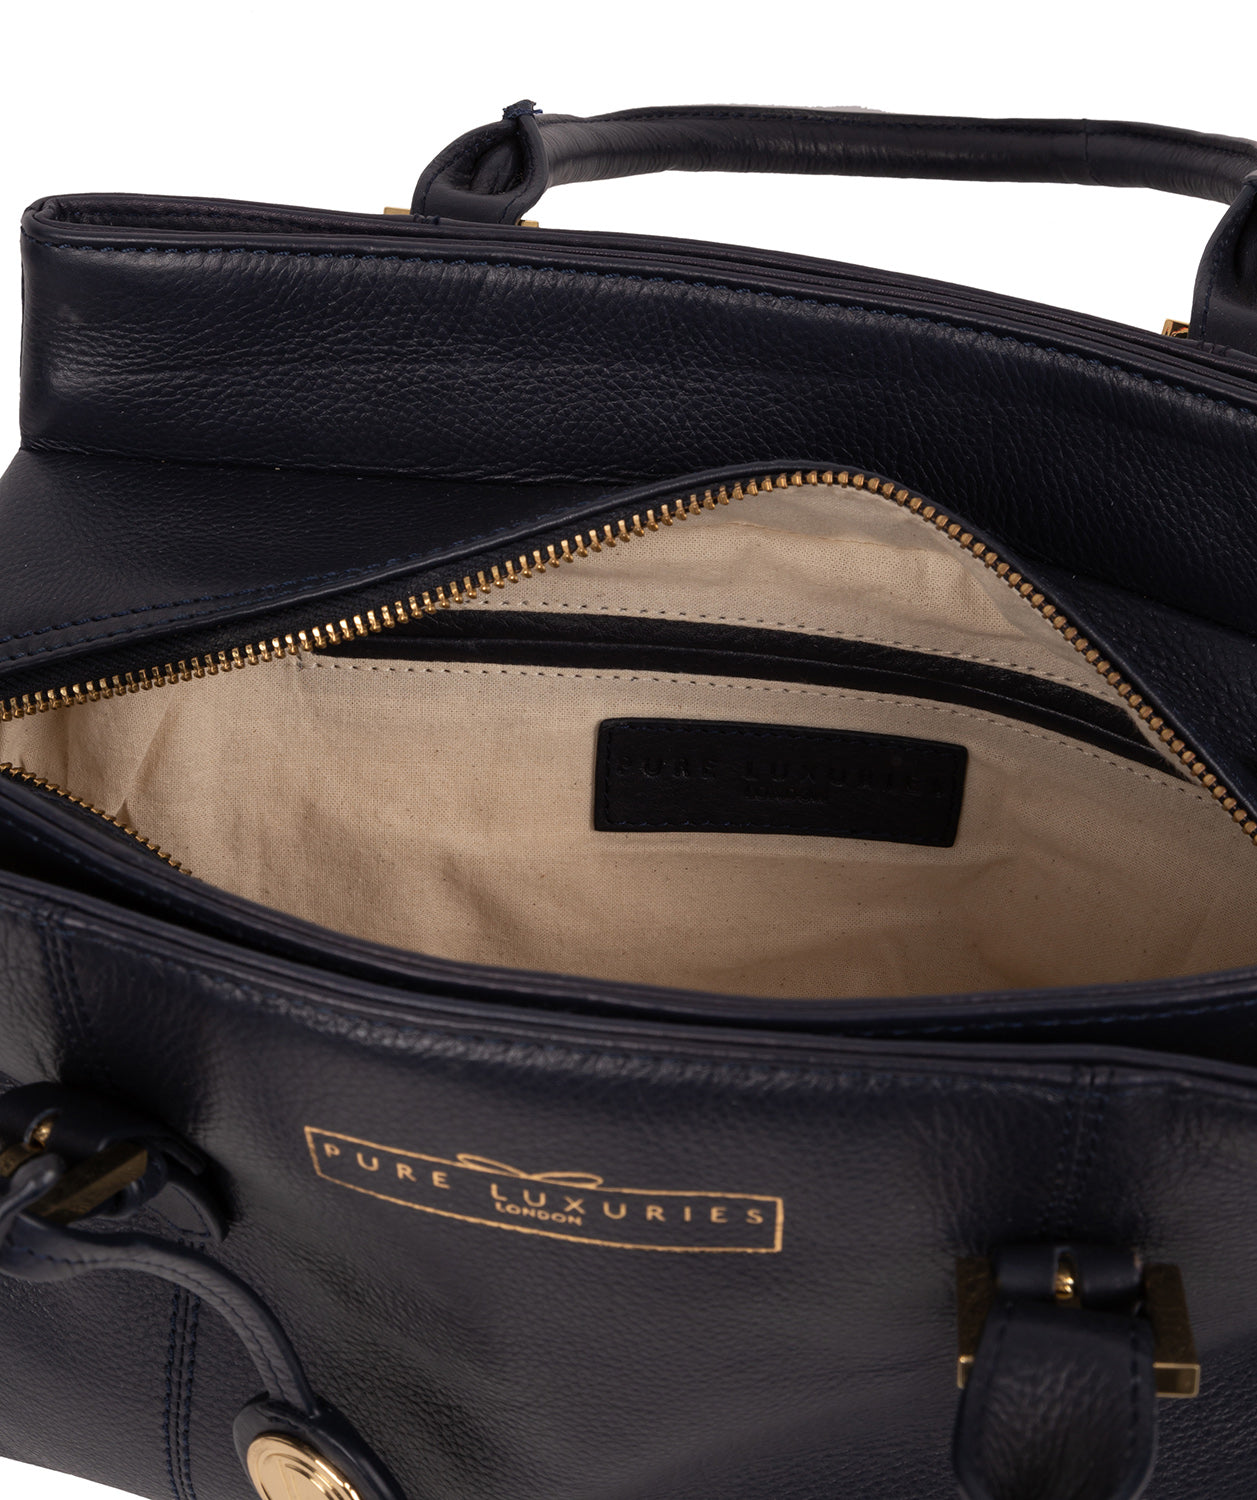 Blue Leather Handbag 'Astley' by Pure Luxuries – Pure Luxuries London